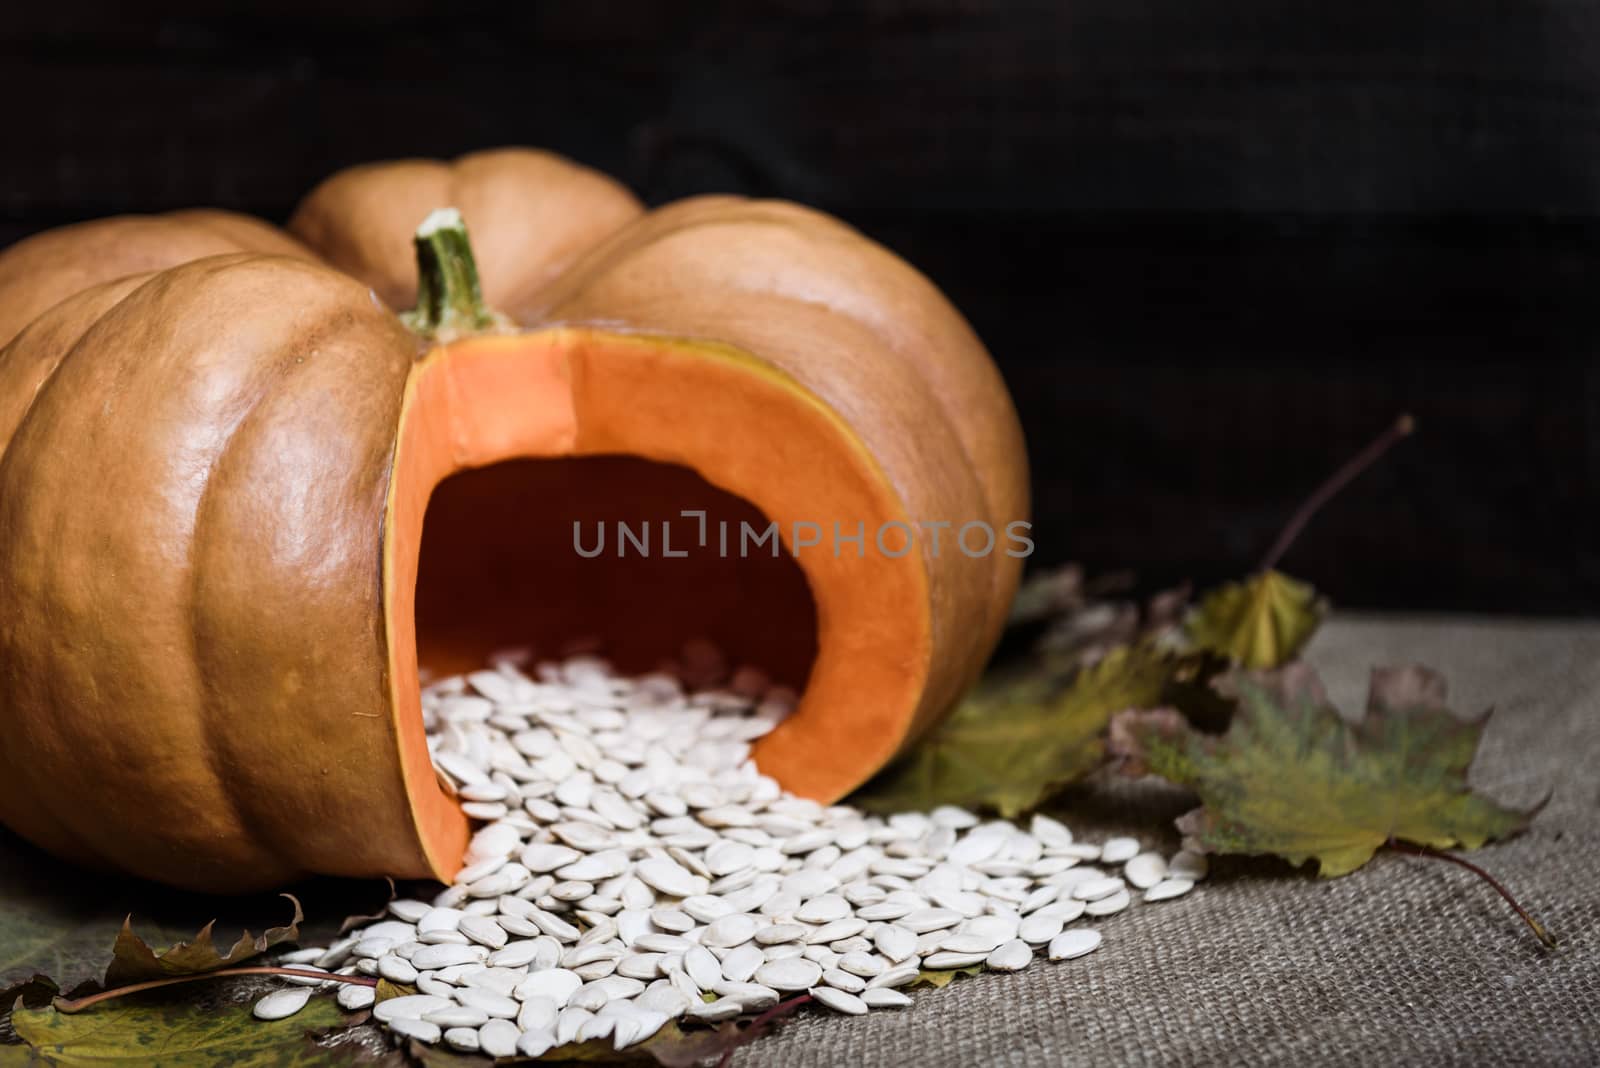 pumpkin lying on a wooden table by Andreua